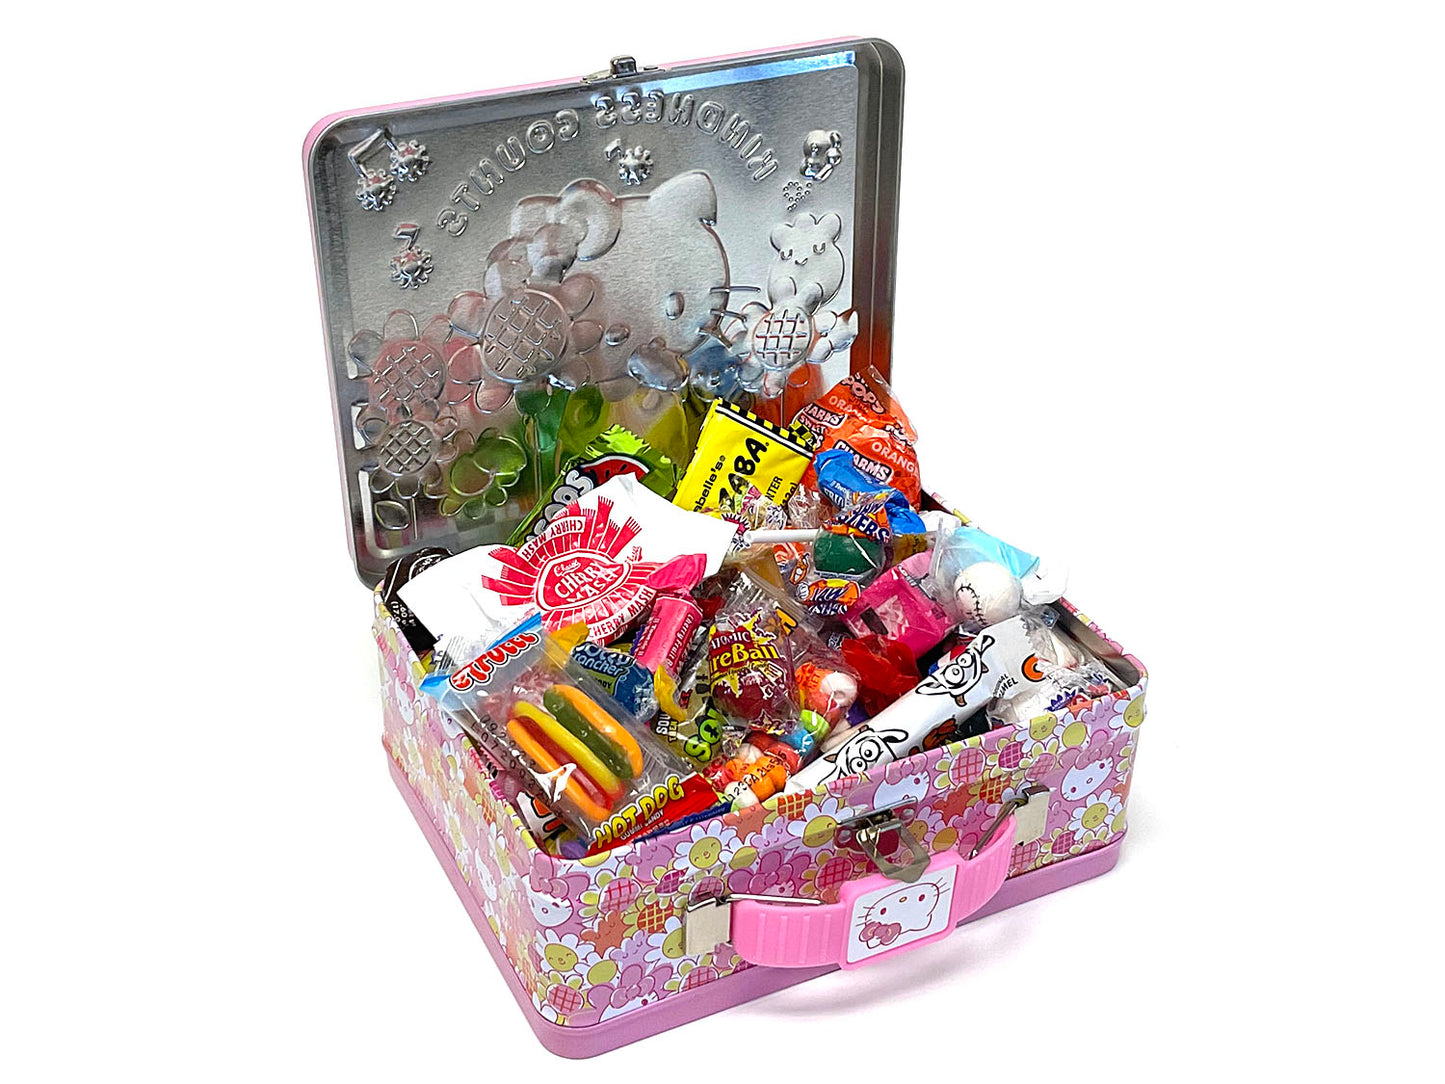 Lunch Box - Hello Kitty - Kindness Counts - penny candy assortment